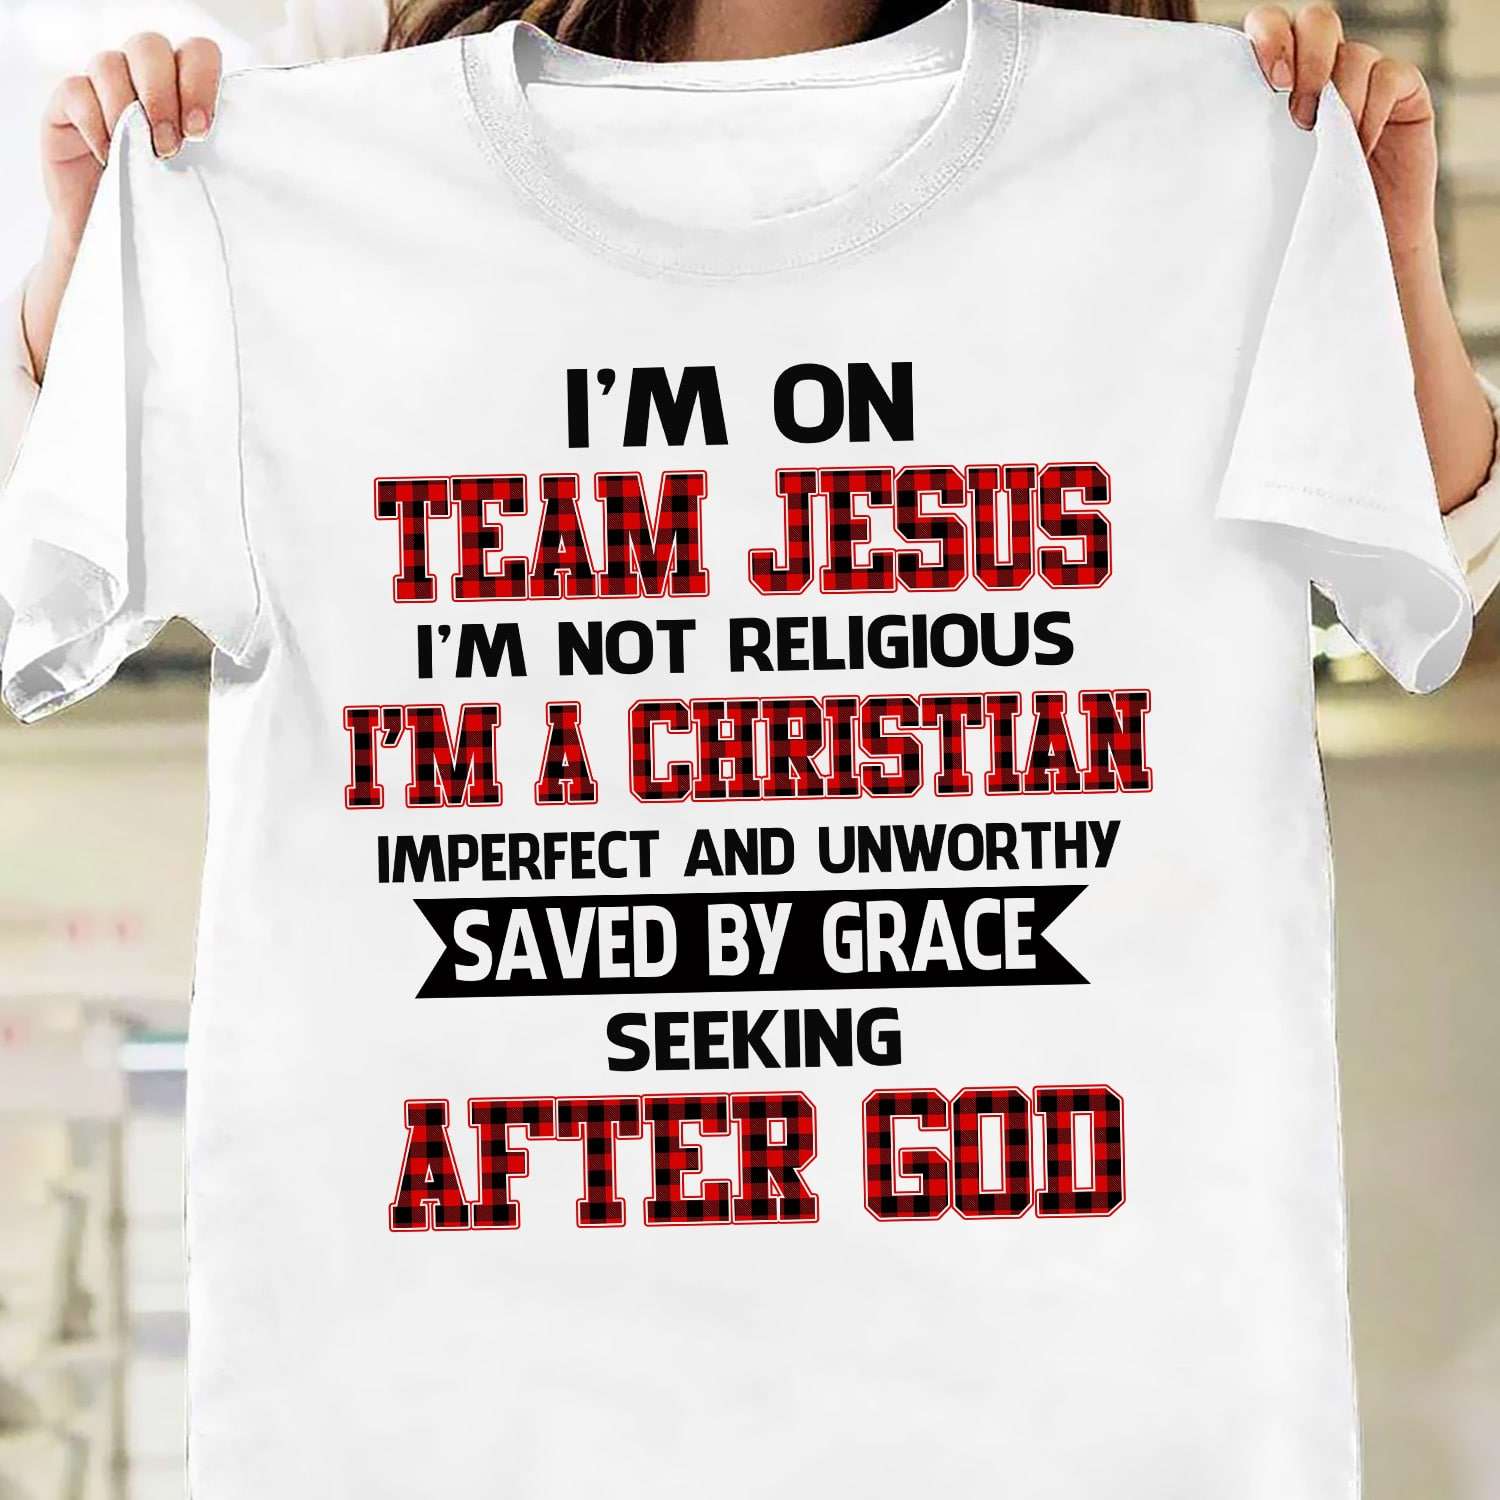 I'm on team Jesus I'm not religious I'm a Christian imperfect and unworthy - Jesuse the god